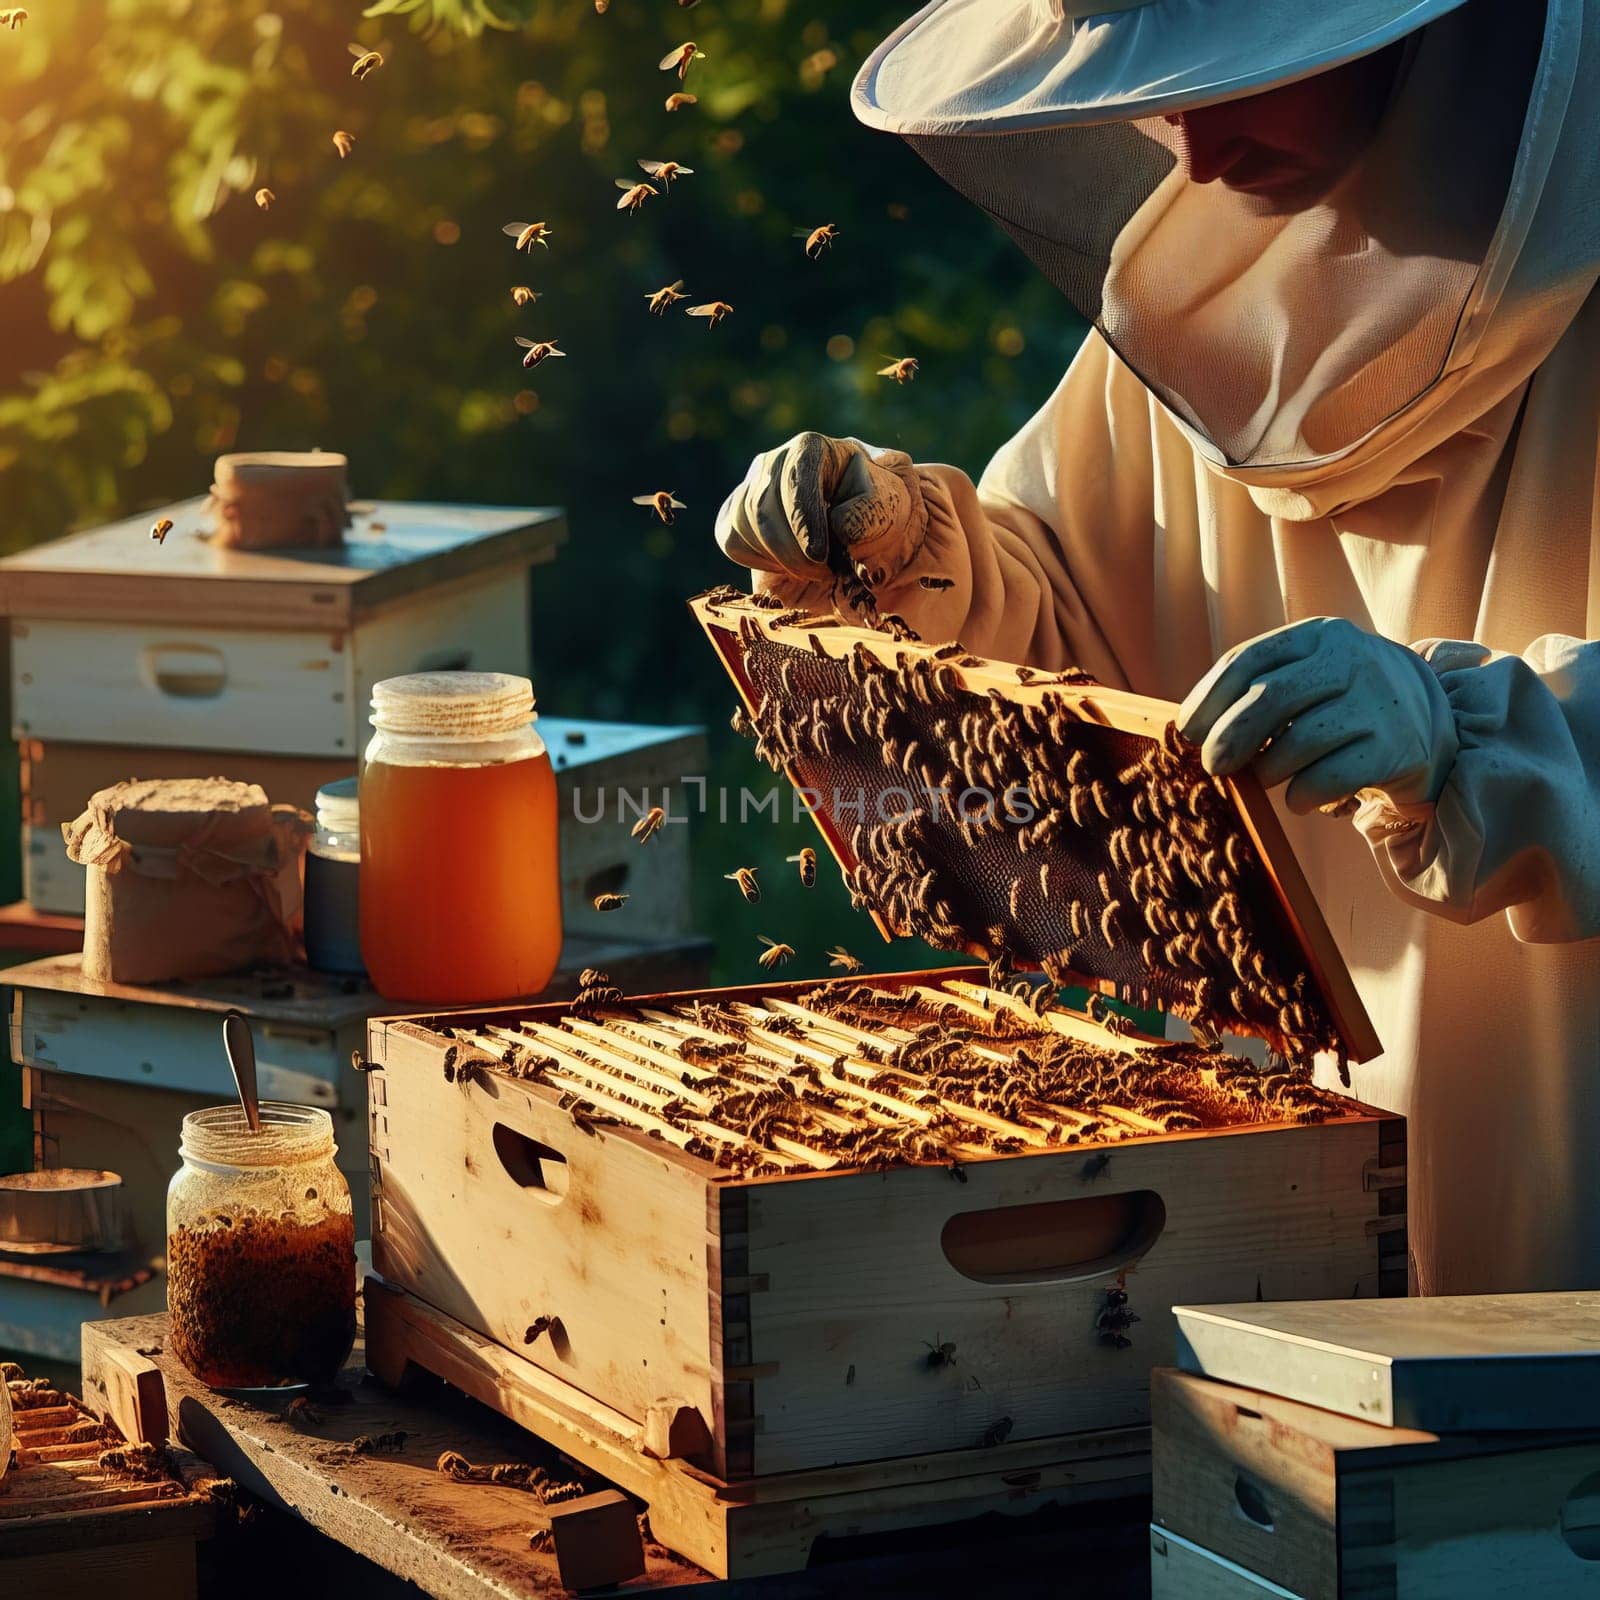 Beekeeper in protective gear inspecting a honeycomb frame, with bees flying around and jars of honey in the background